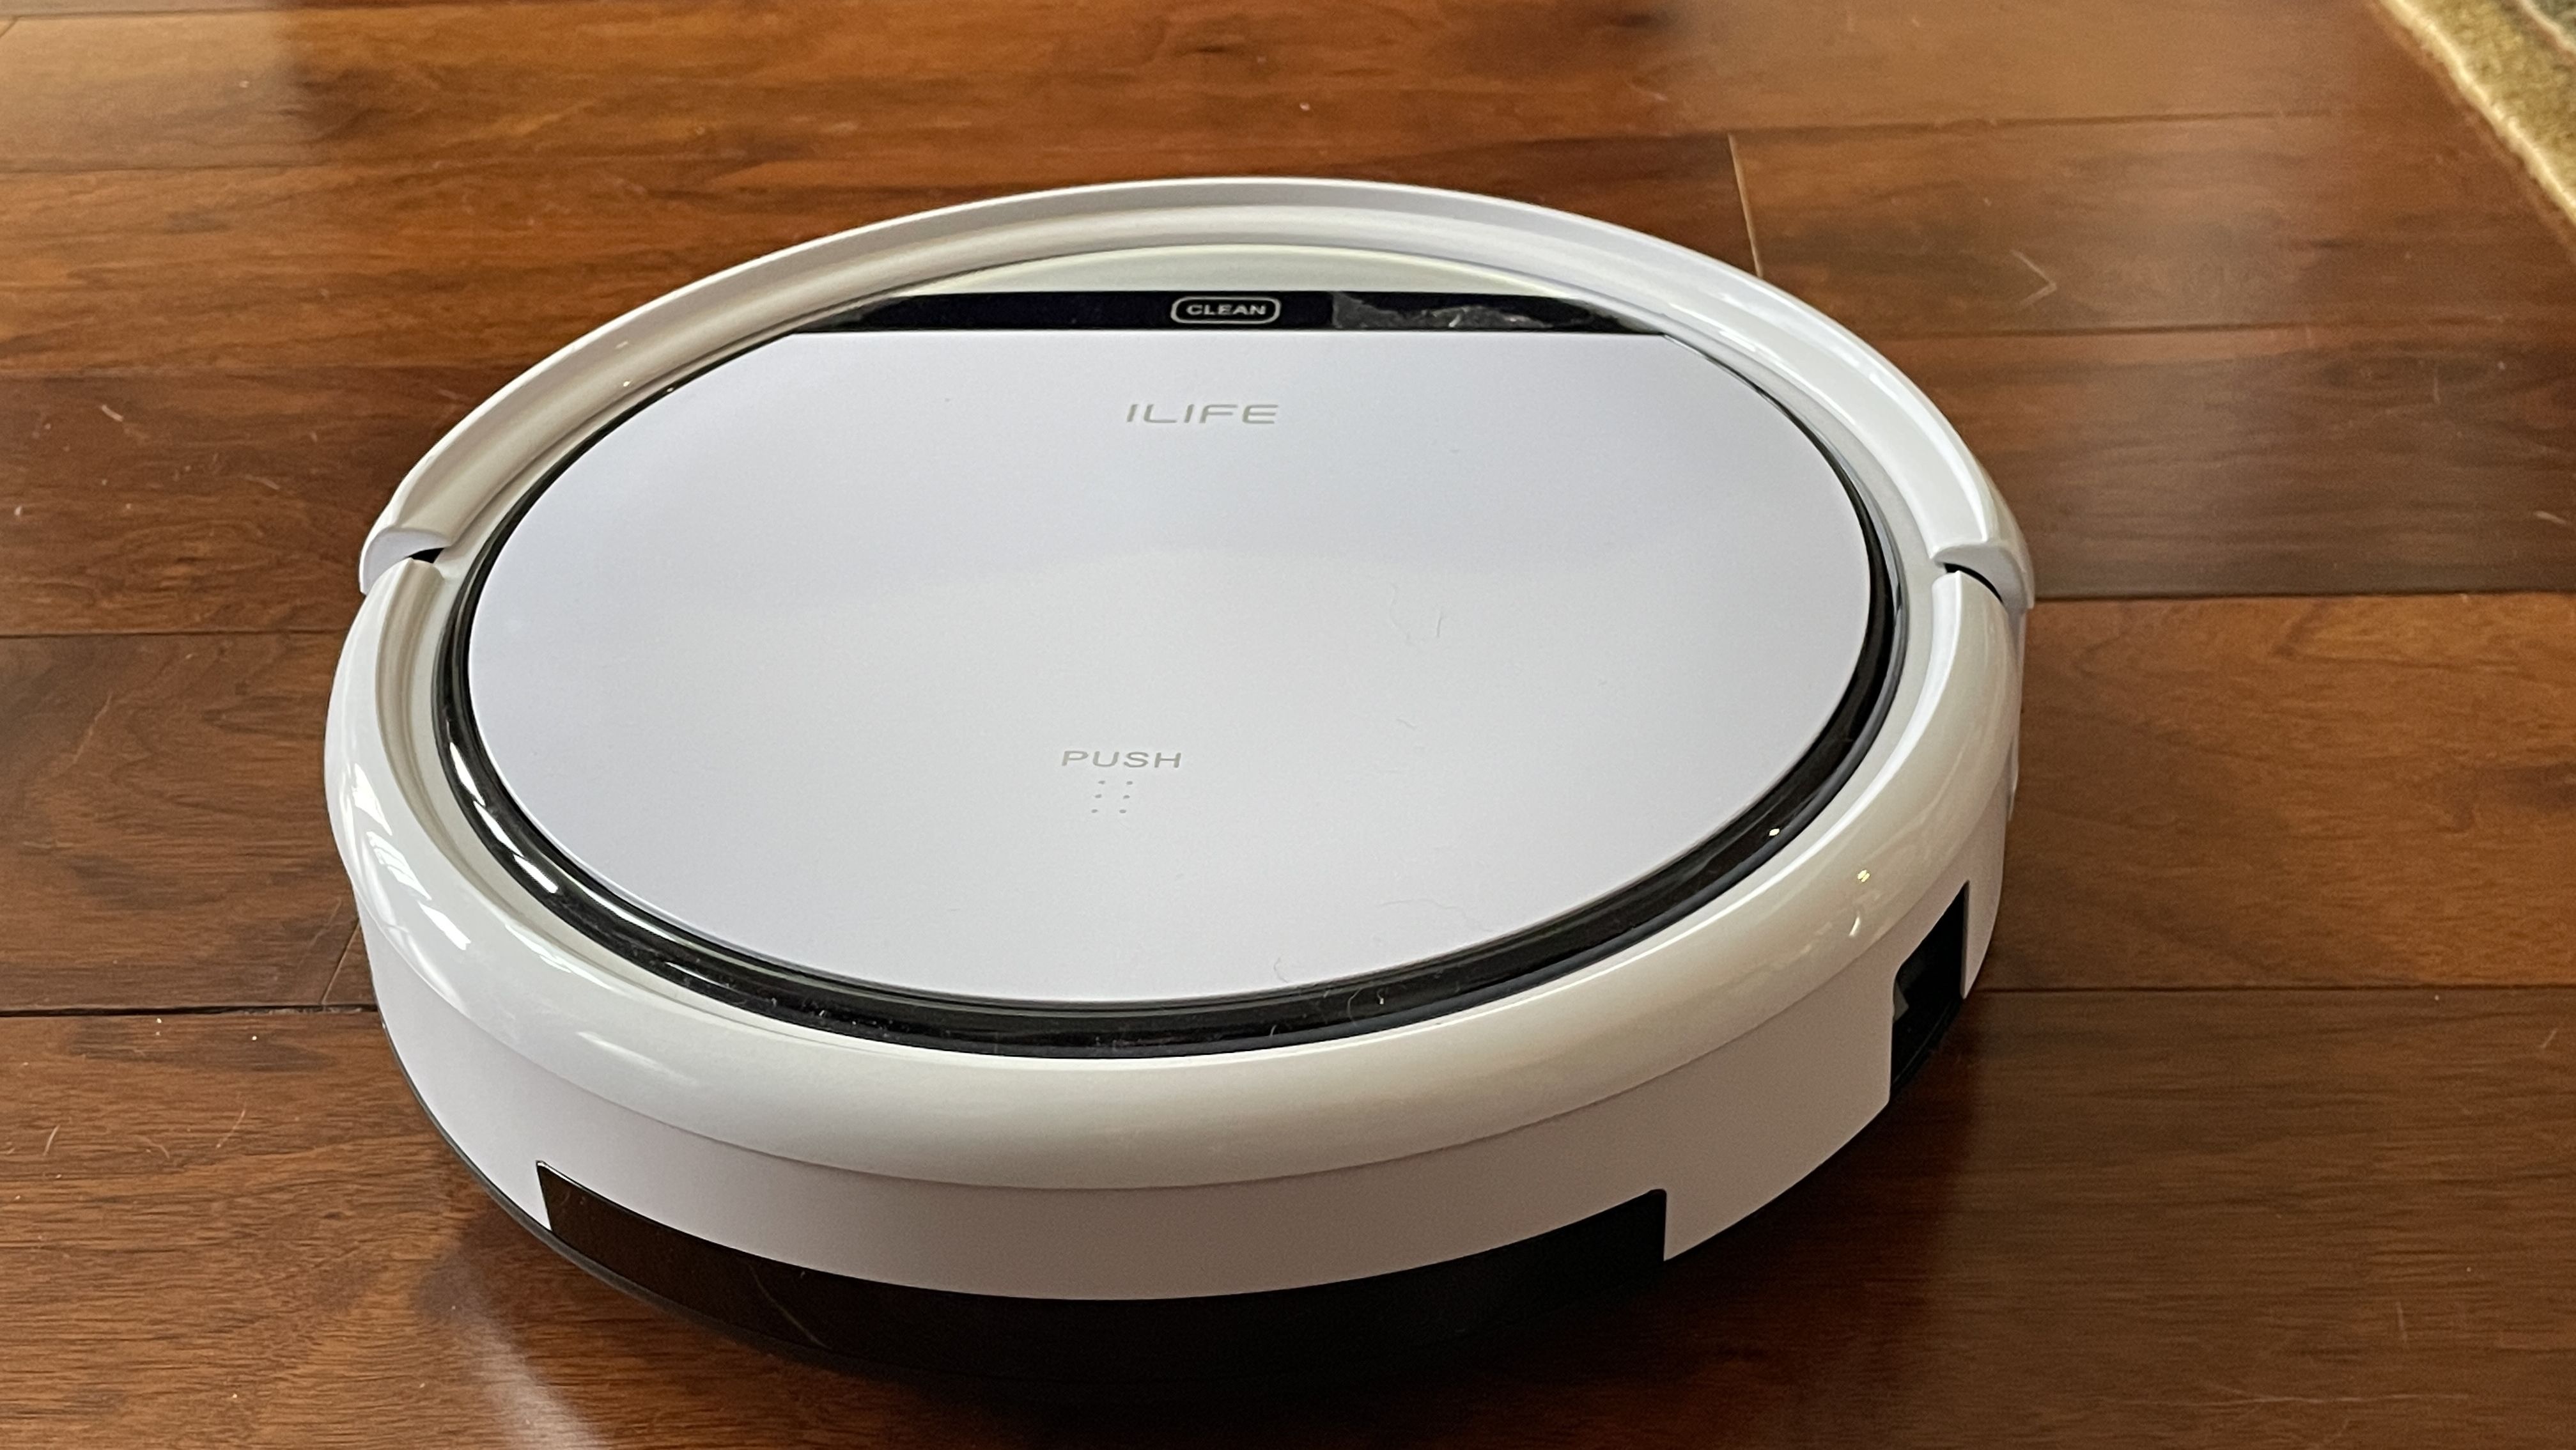 Xiaomi Robot Vacuum Lineup is The Pinnacle of Smart Home Cleaning